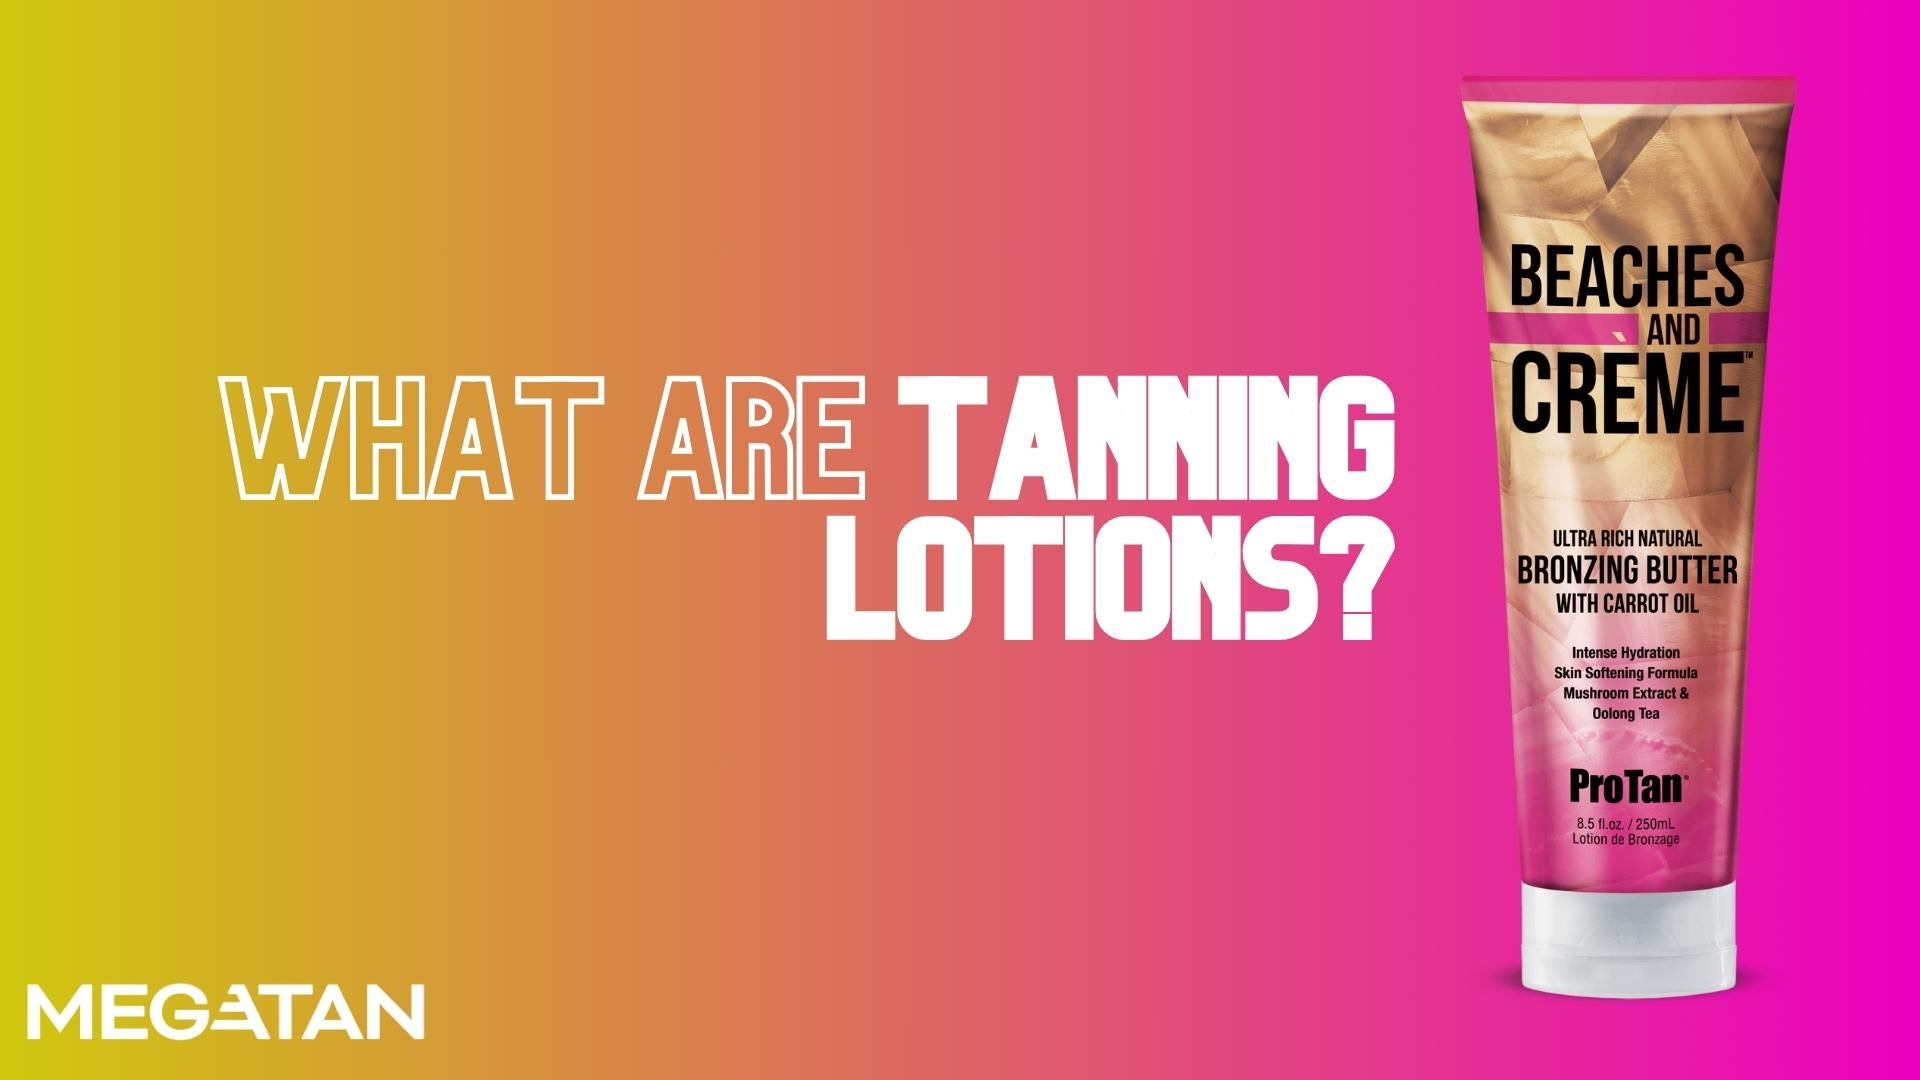 What are Tanning Lotions?